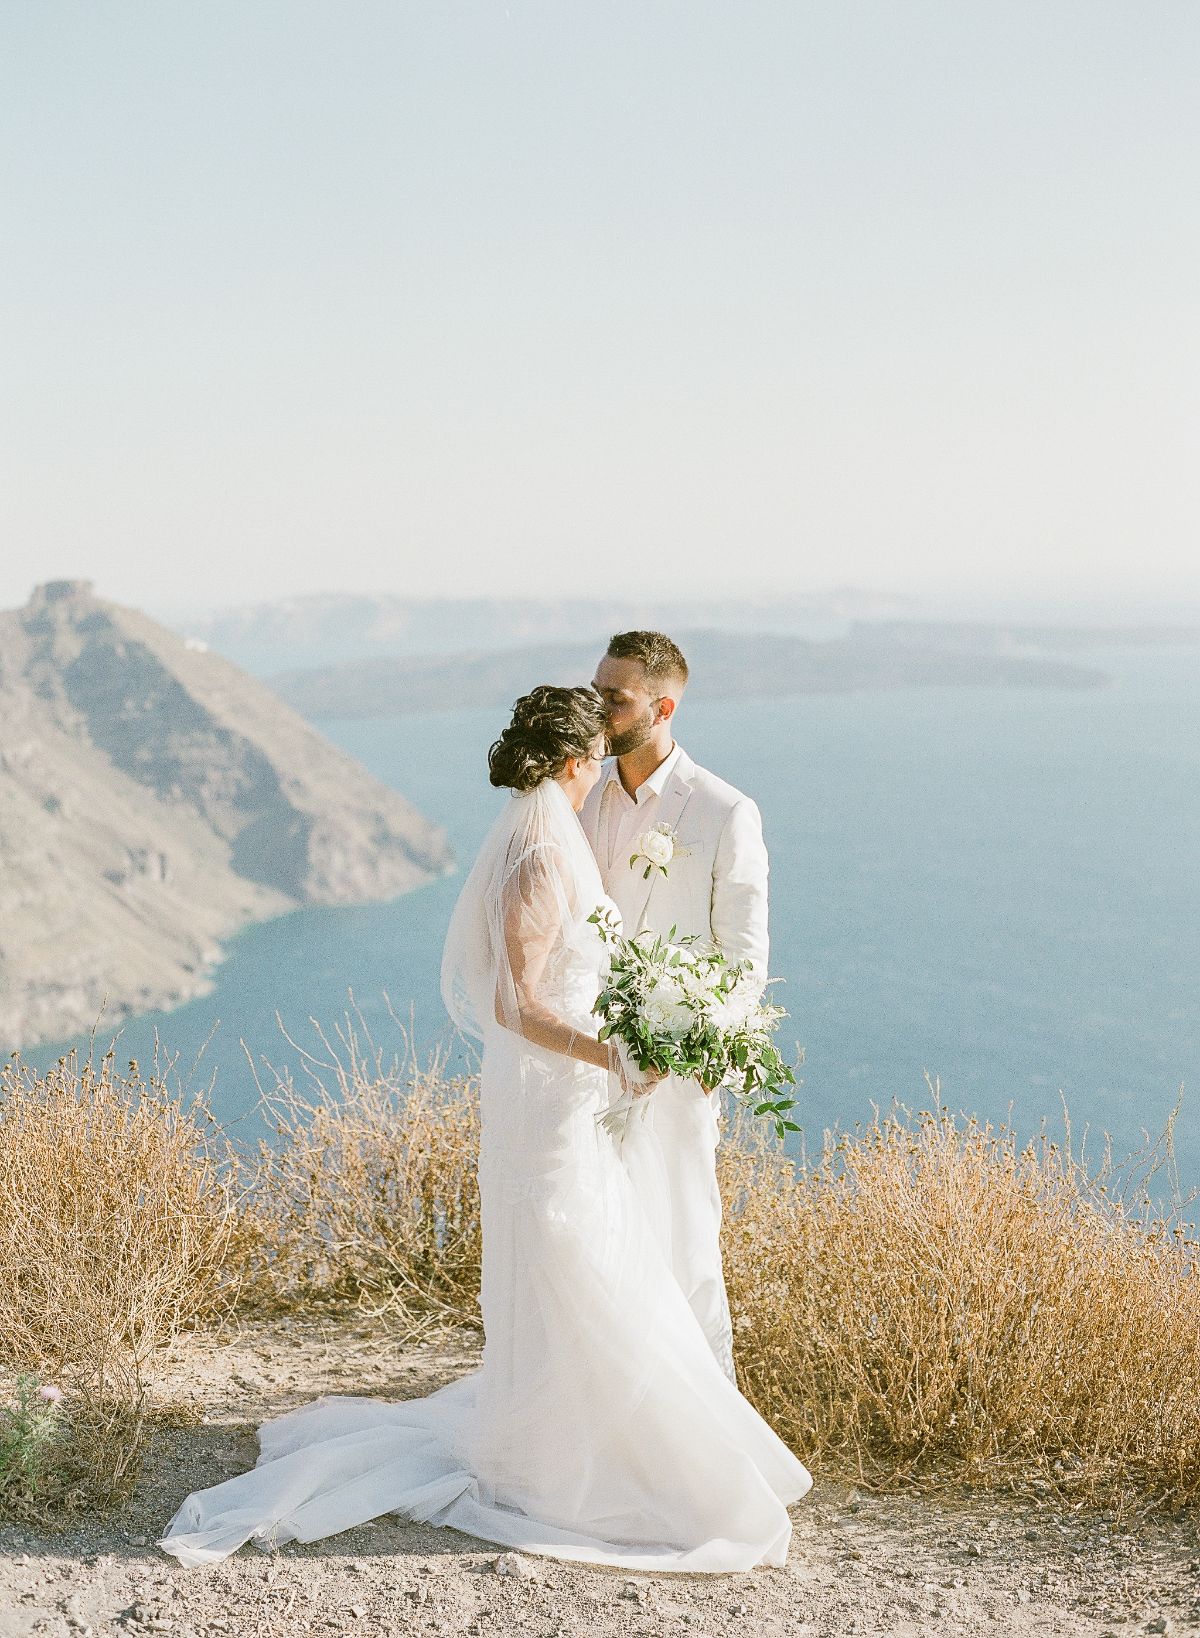 elopement in santorini - wedding photographer greece - couple being photographed on the edge of a cliff